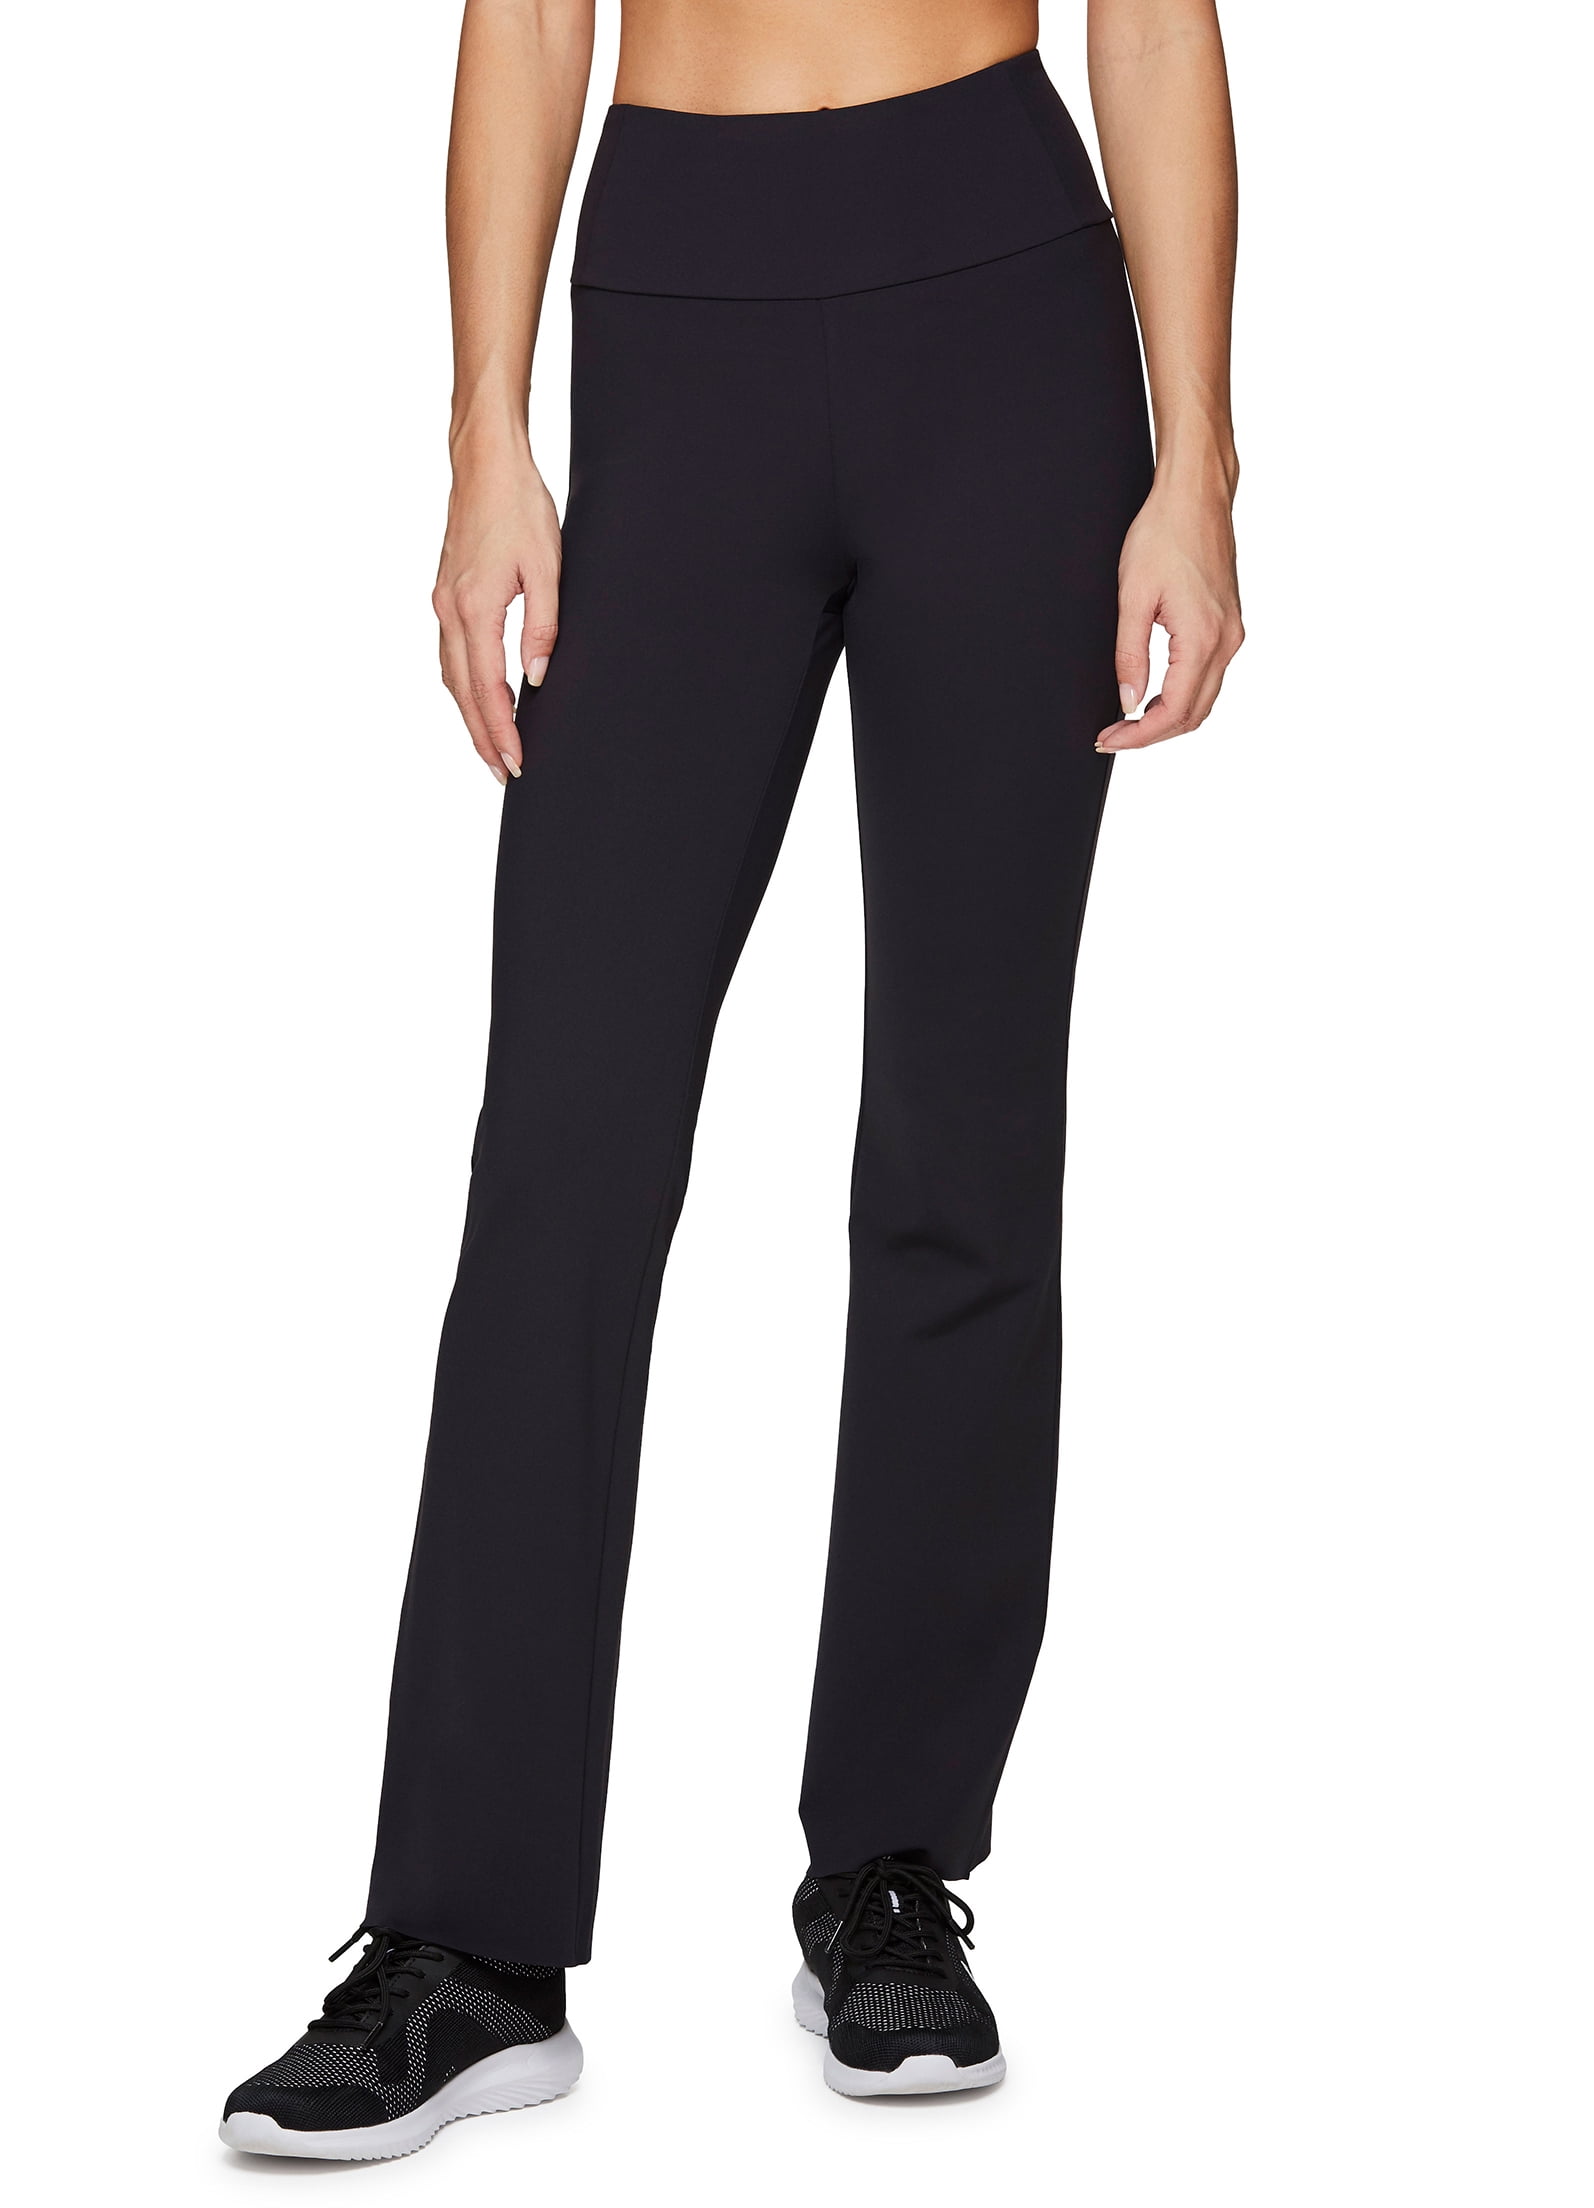 RBX Active Women's Super Soft Supportive Bootcut Yoga Pant 